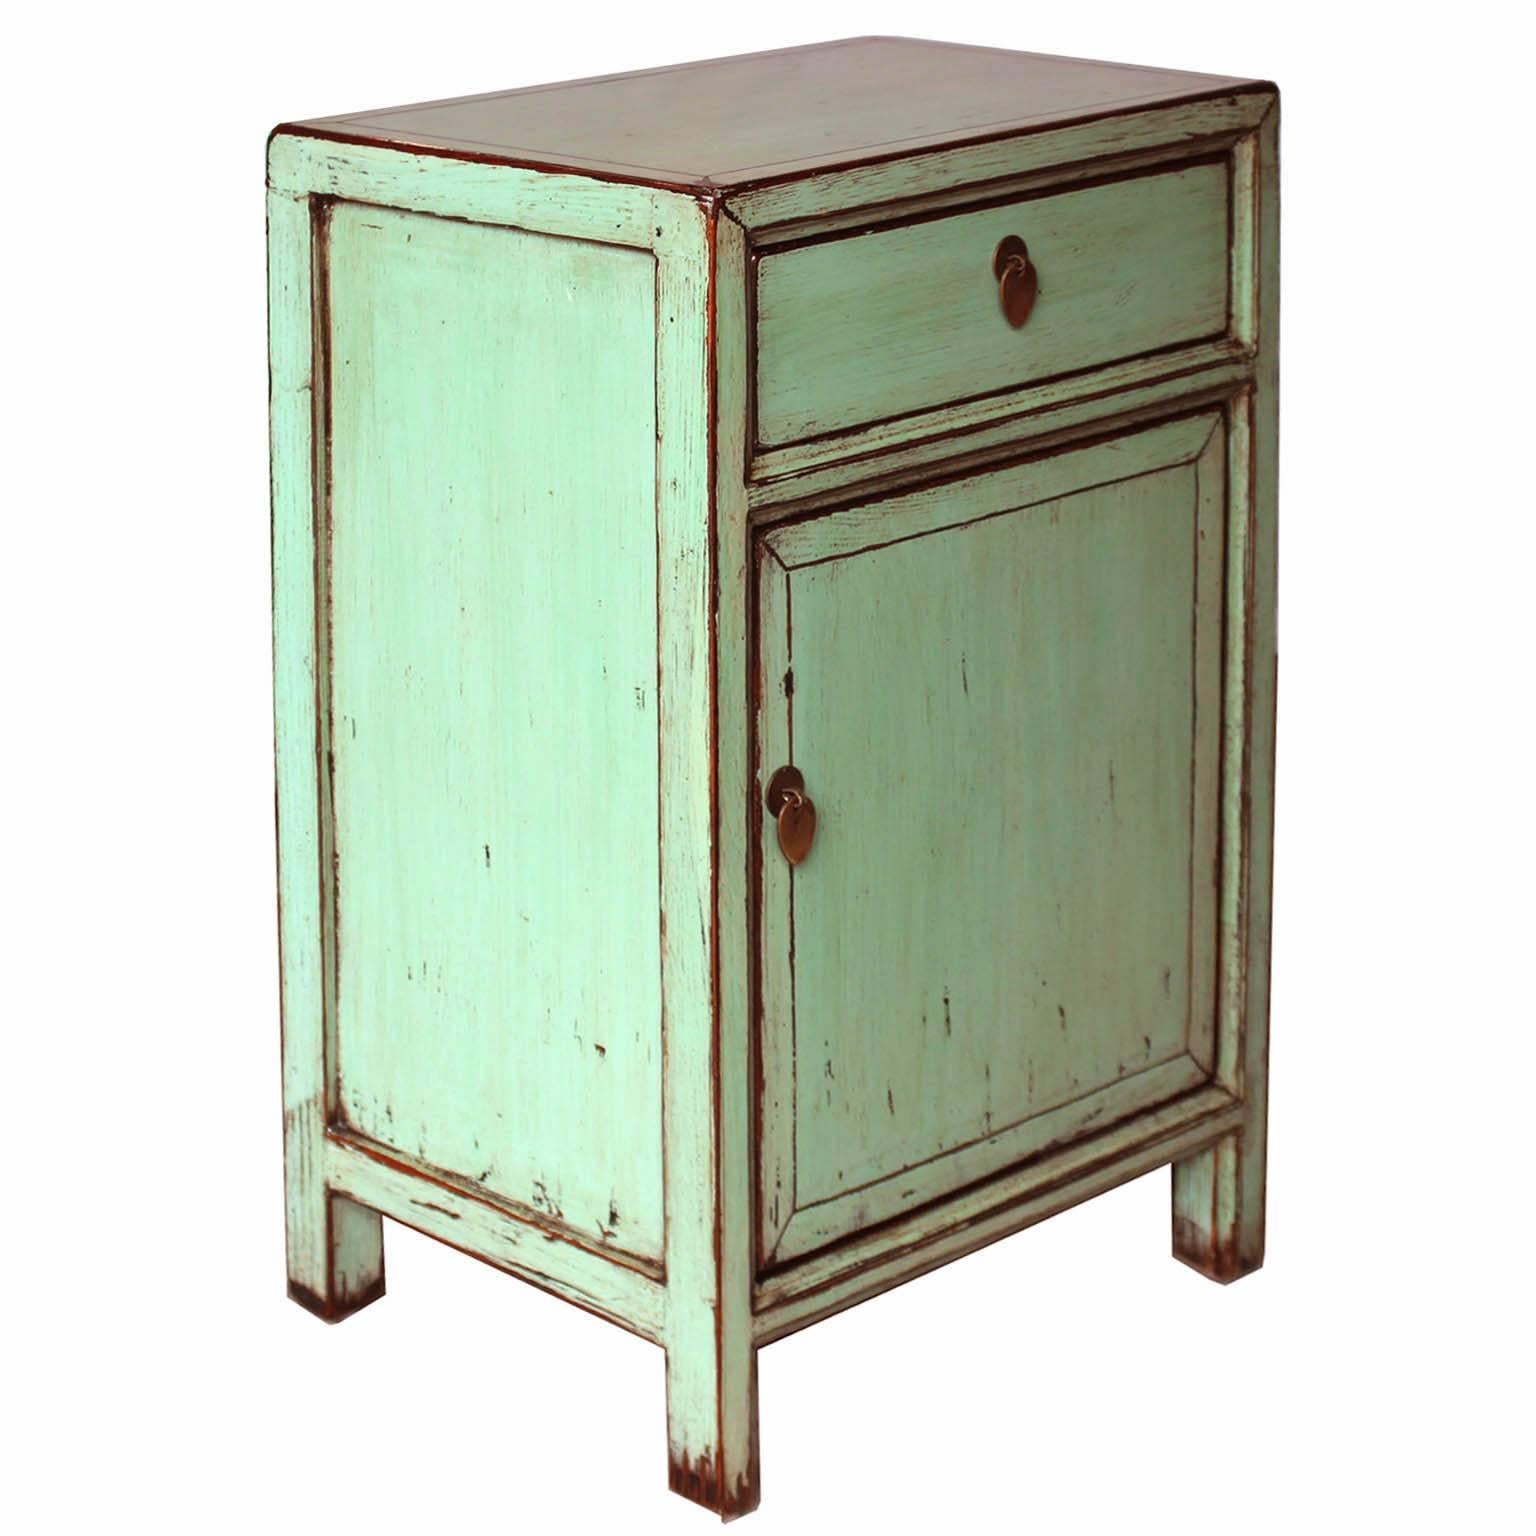 Contemporary one-drawer side chest with exposed wood edges and mint green lacquer finish will add a pop of color to a modern bedroom. Priced individually at $ 1550 each.